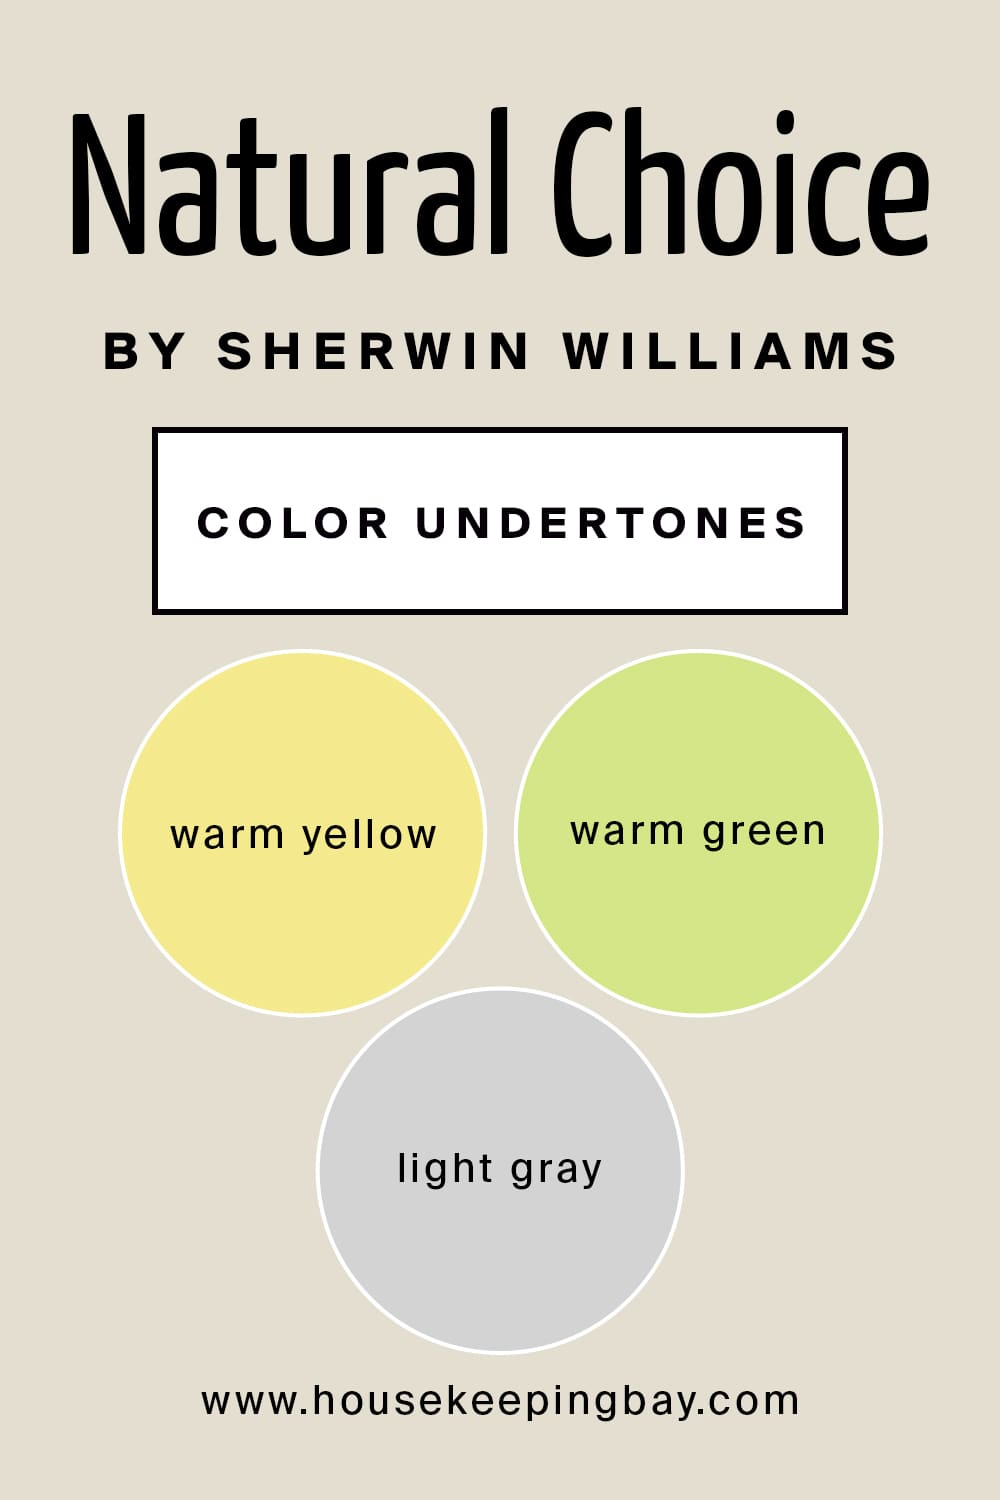 Natural Choice by Sherwin Williams Color Undertones